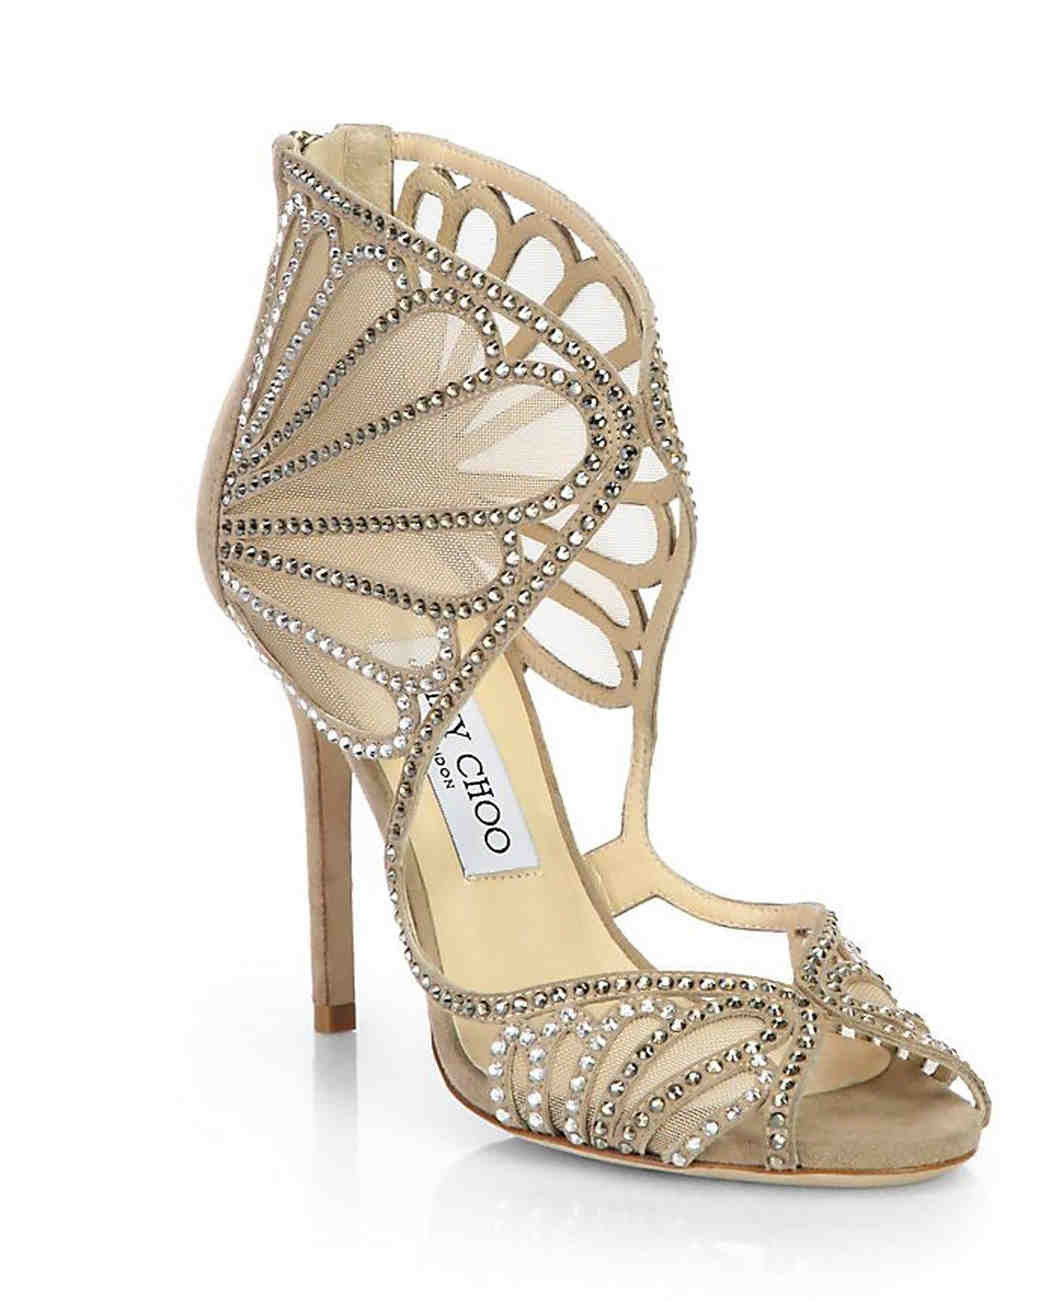 Jimmy Choo Wedding Shoes
 36 Best Shoes for a Bride to Wear to a Fall Wedding